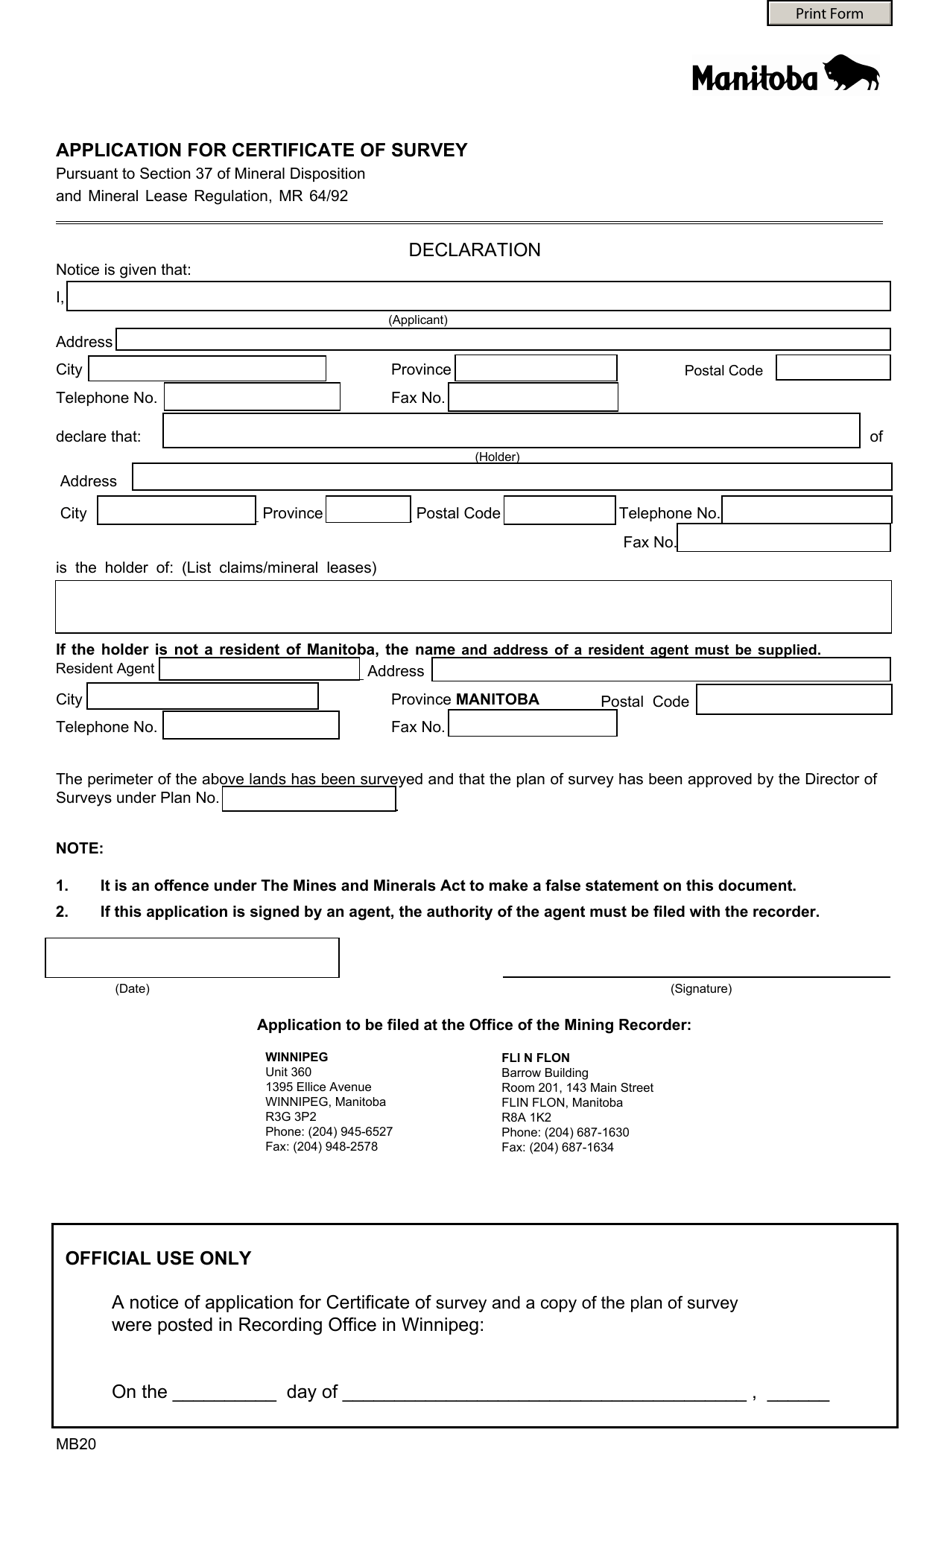 Form MB20 Application for Certificate of Survey - Manitoba, Canada, Page 1